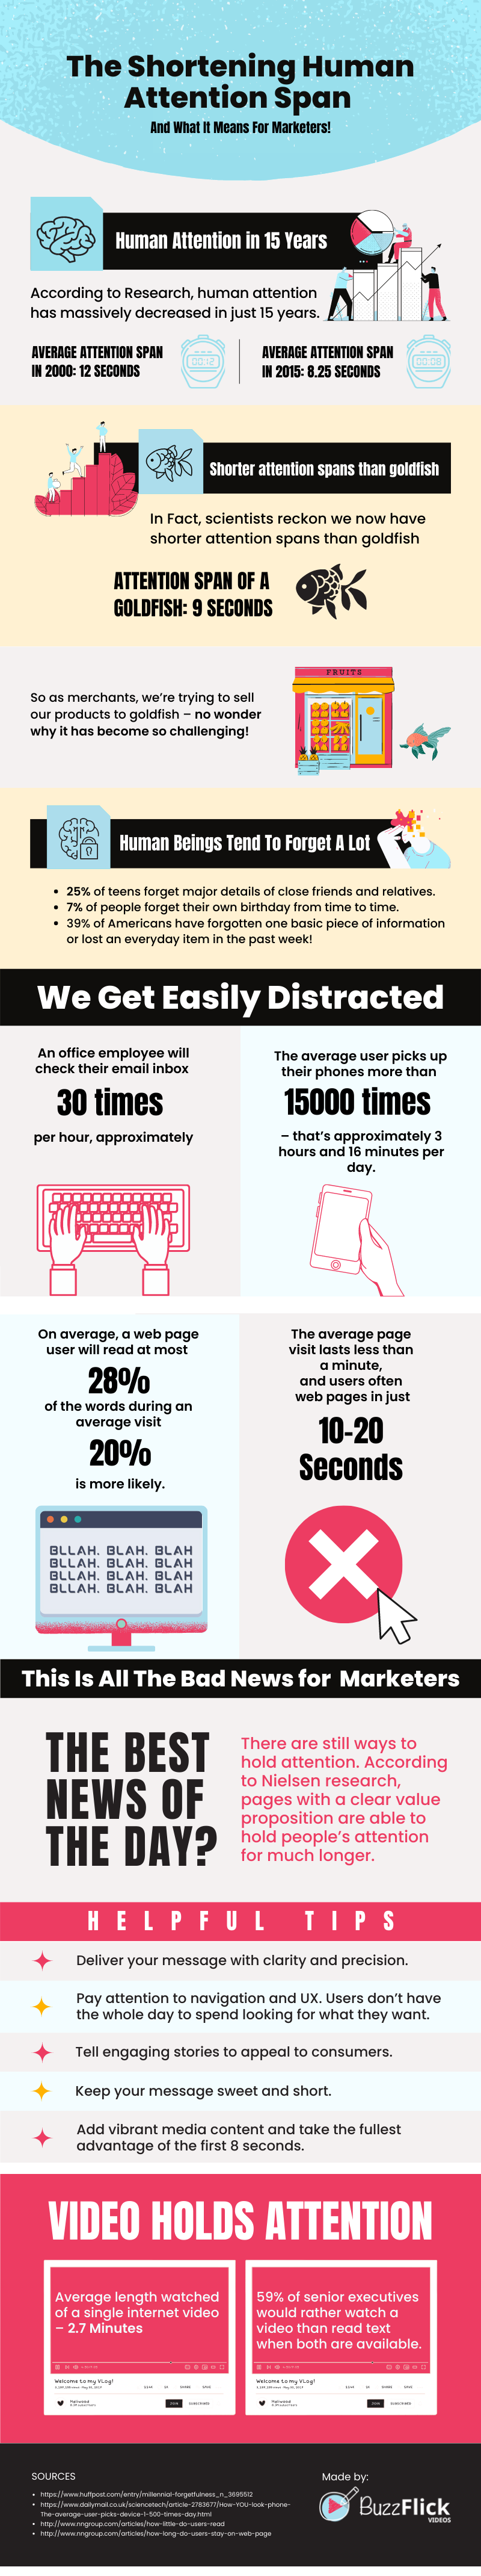 human attention span infographic